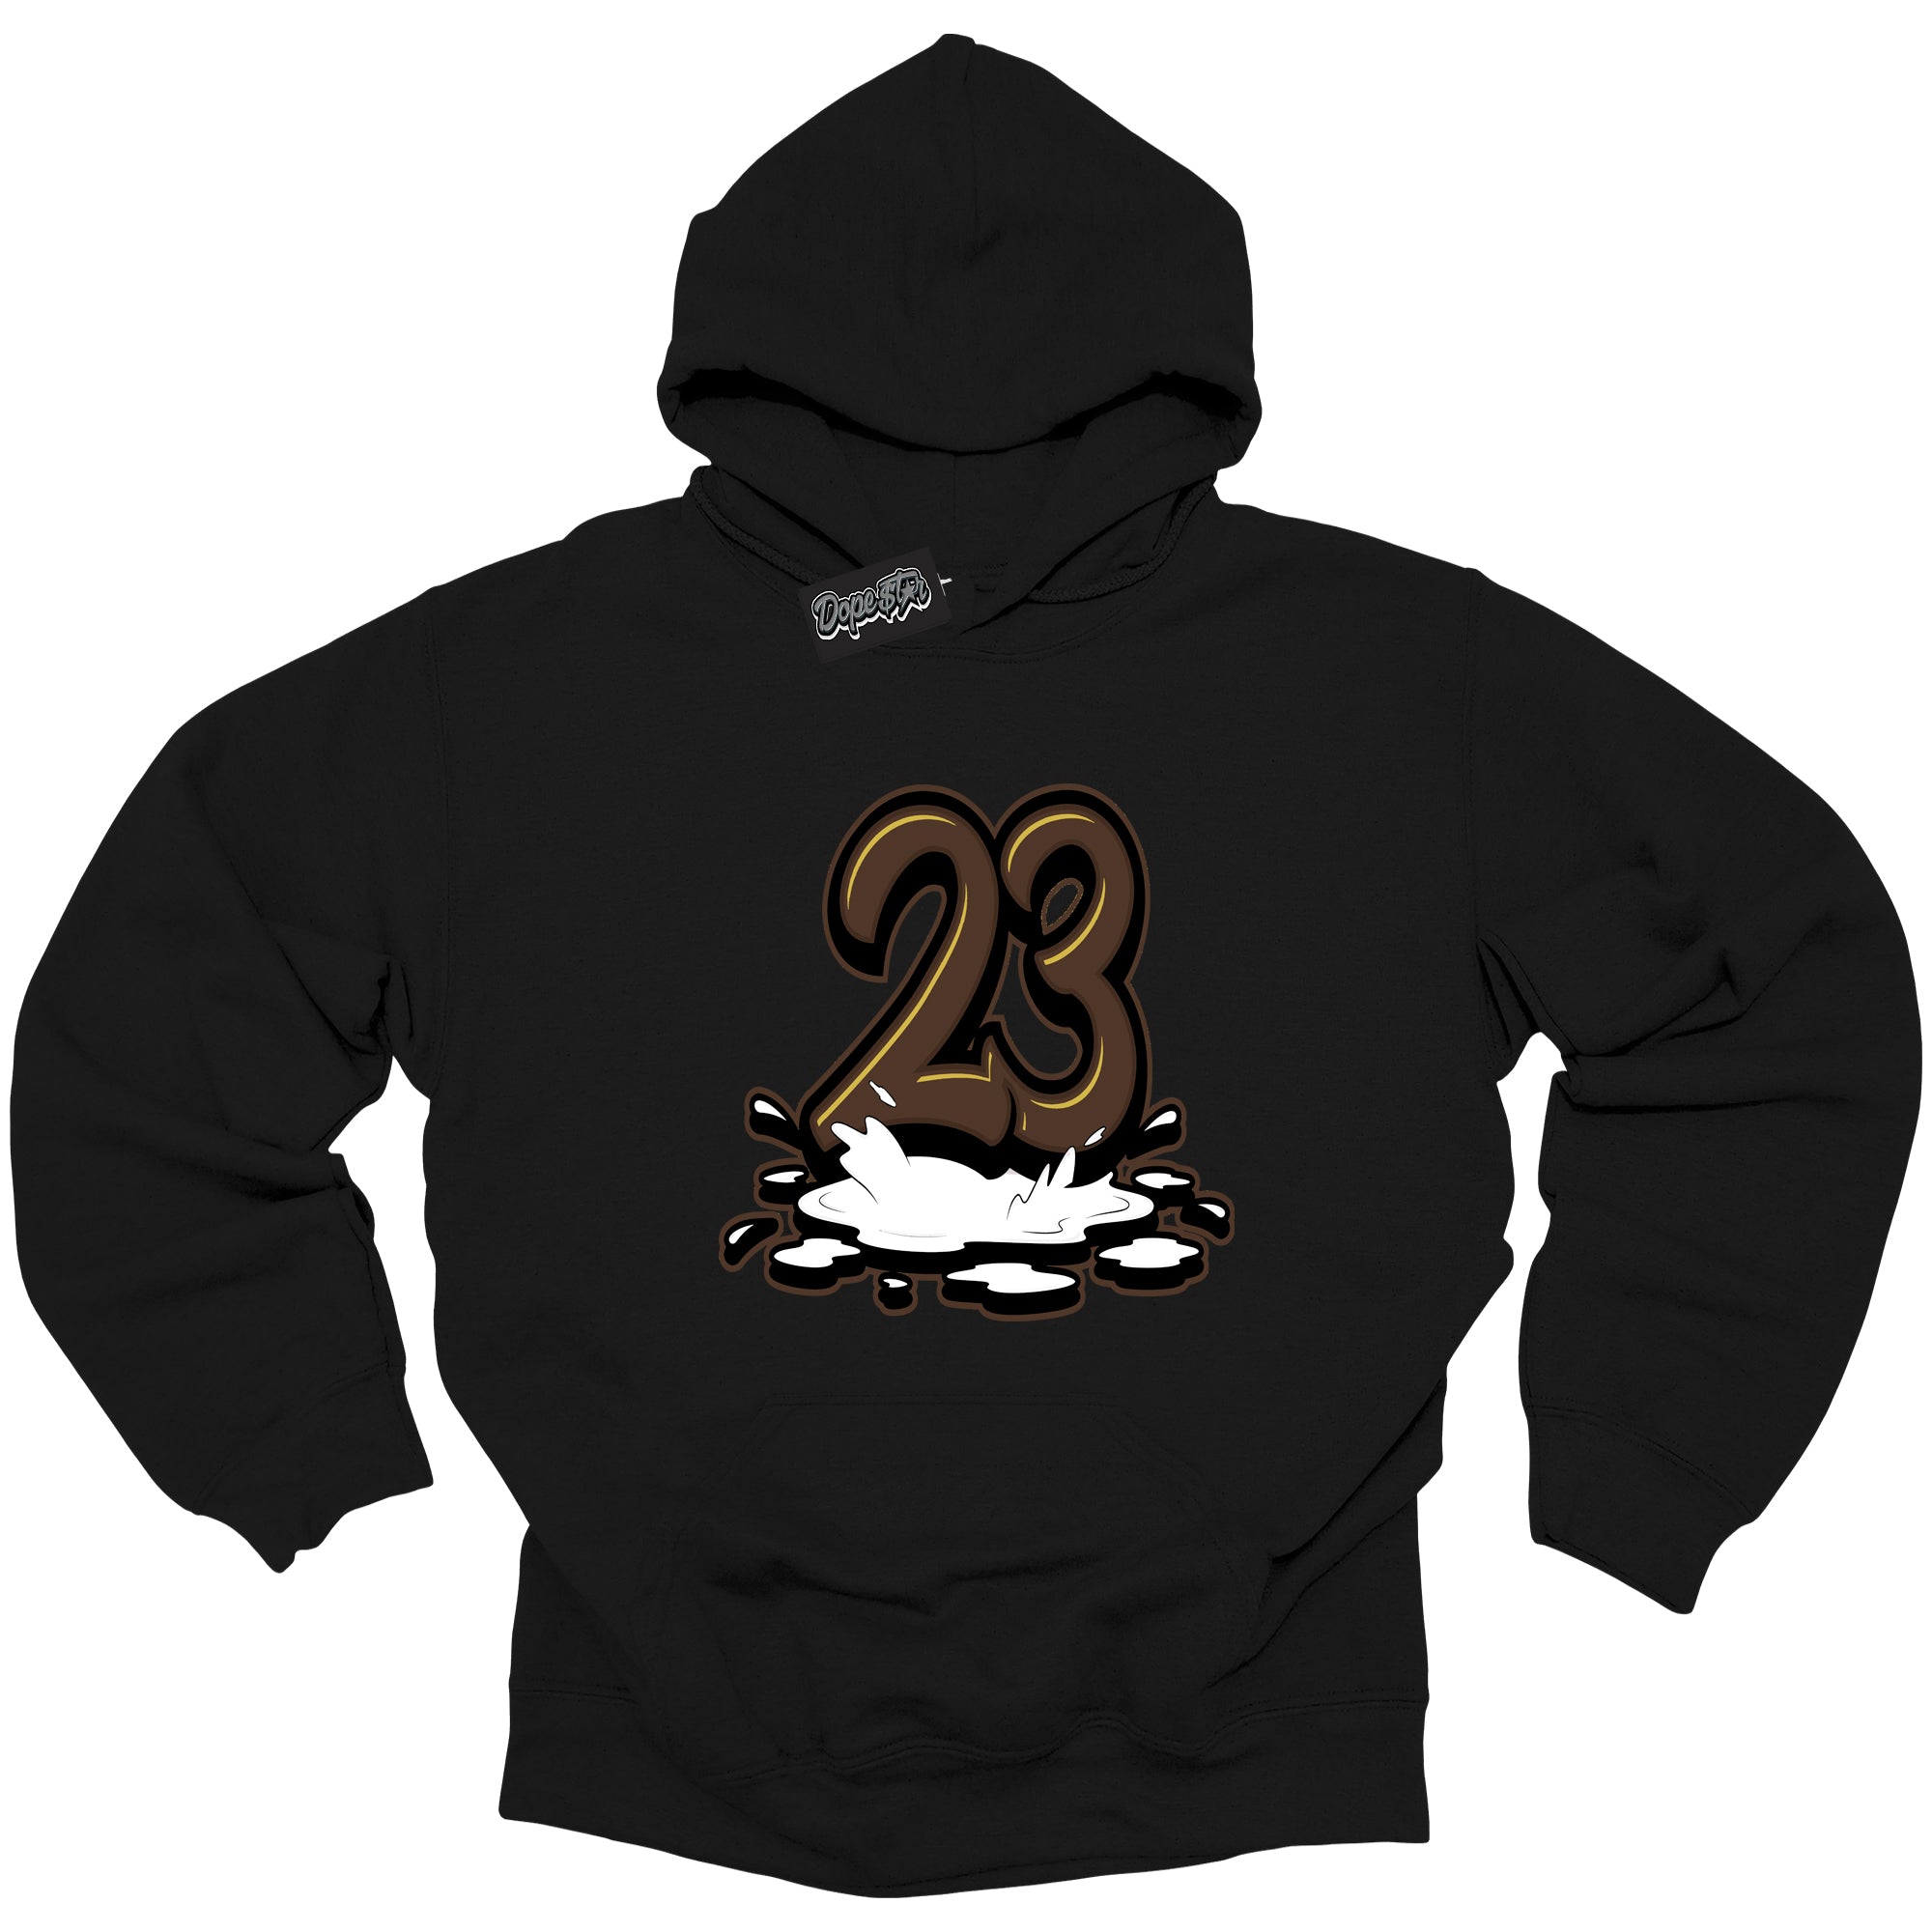 Cool Black Graphic DopeStar Hoodie with “ 23 Melting “ print, that perfectly matches Palomino 1s sneakers